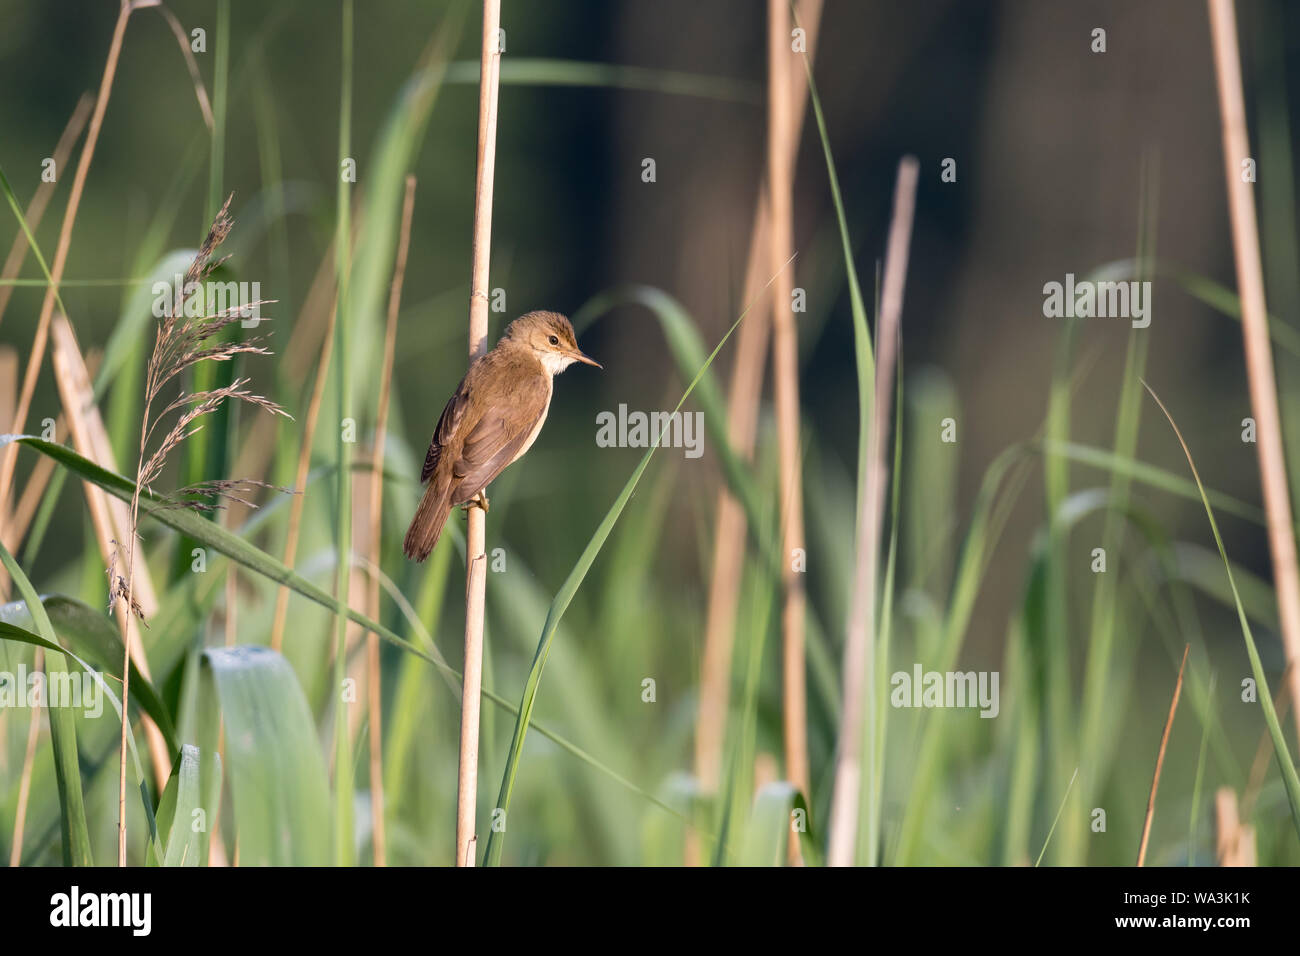 The great reed warbler (Acrocephalus arundinaceus) perched on the reeds by the pond. Cracow, Lesser Poland, Poland. Stock Photo